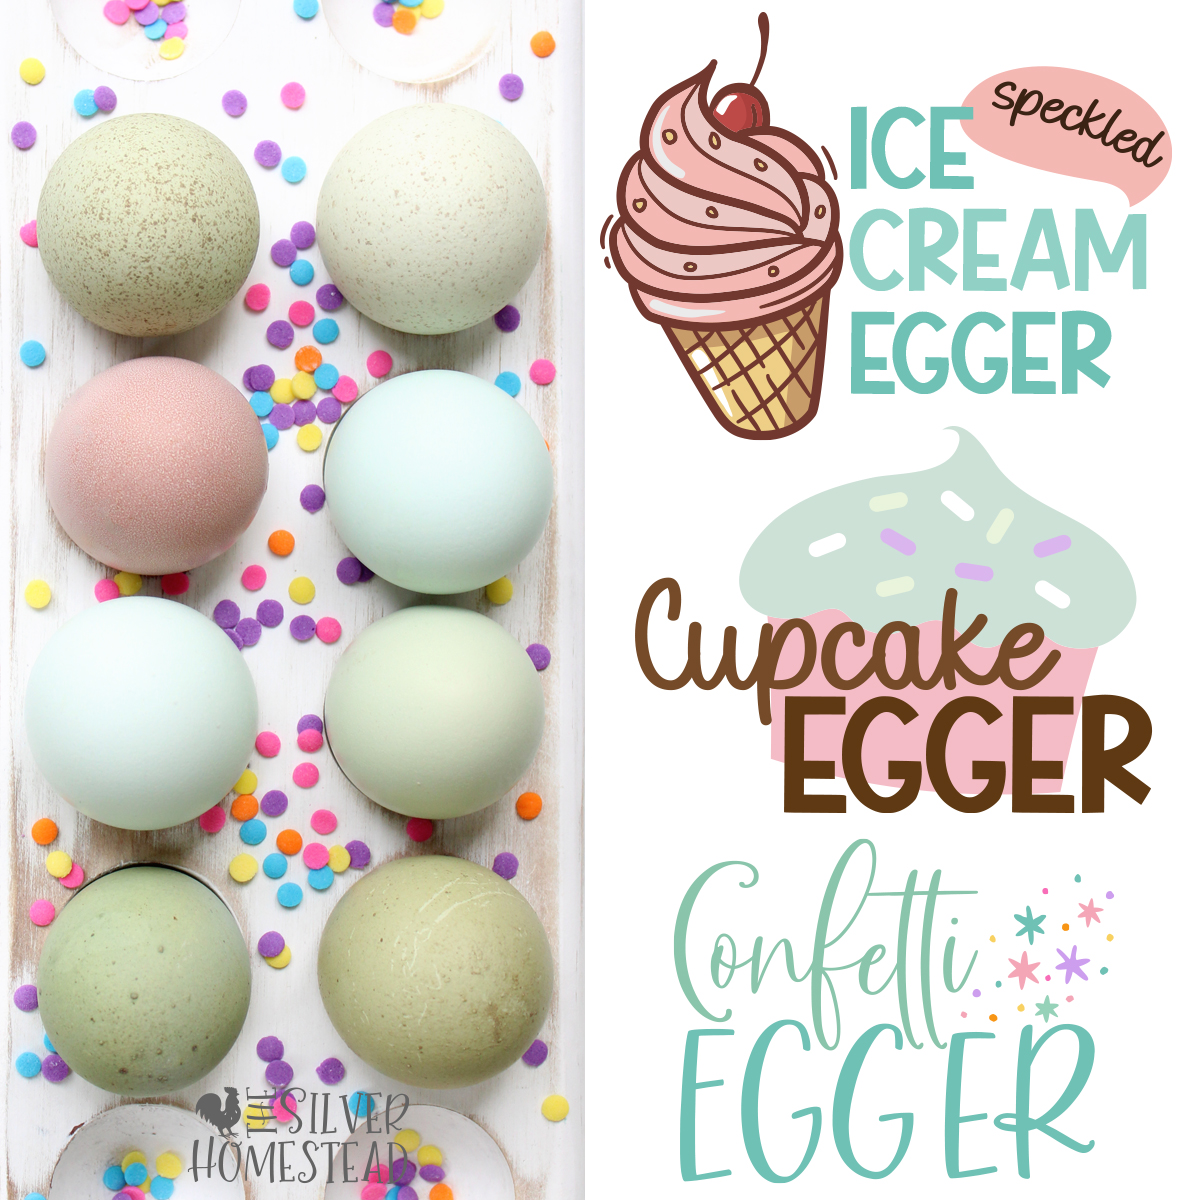 a white tray holding a dozen brightly colored blue, green, and pinkish easter egger eggs with candy sprinkles and digital stickers that read speckled ice cream egger, cupcake egger and Confetti egger